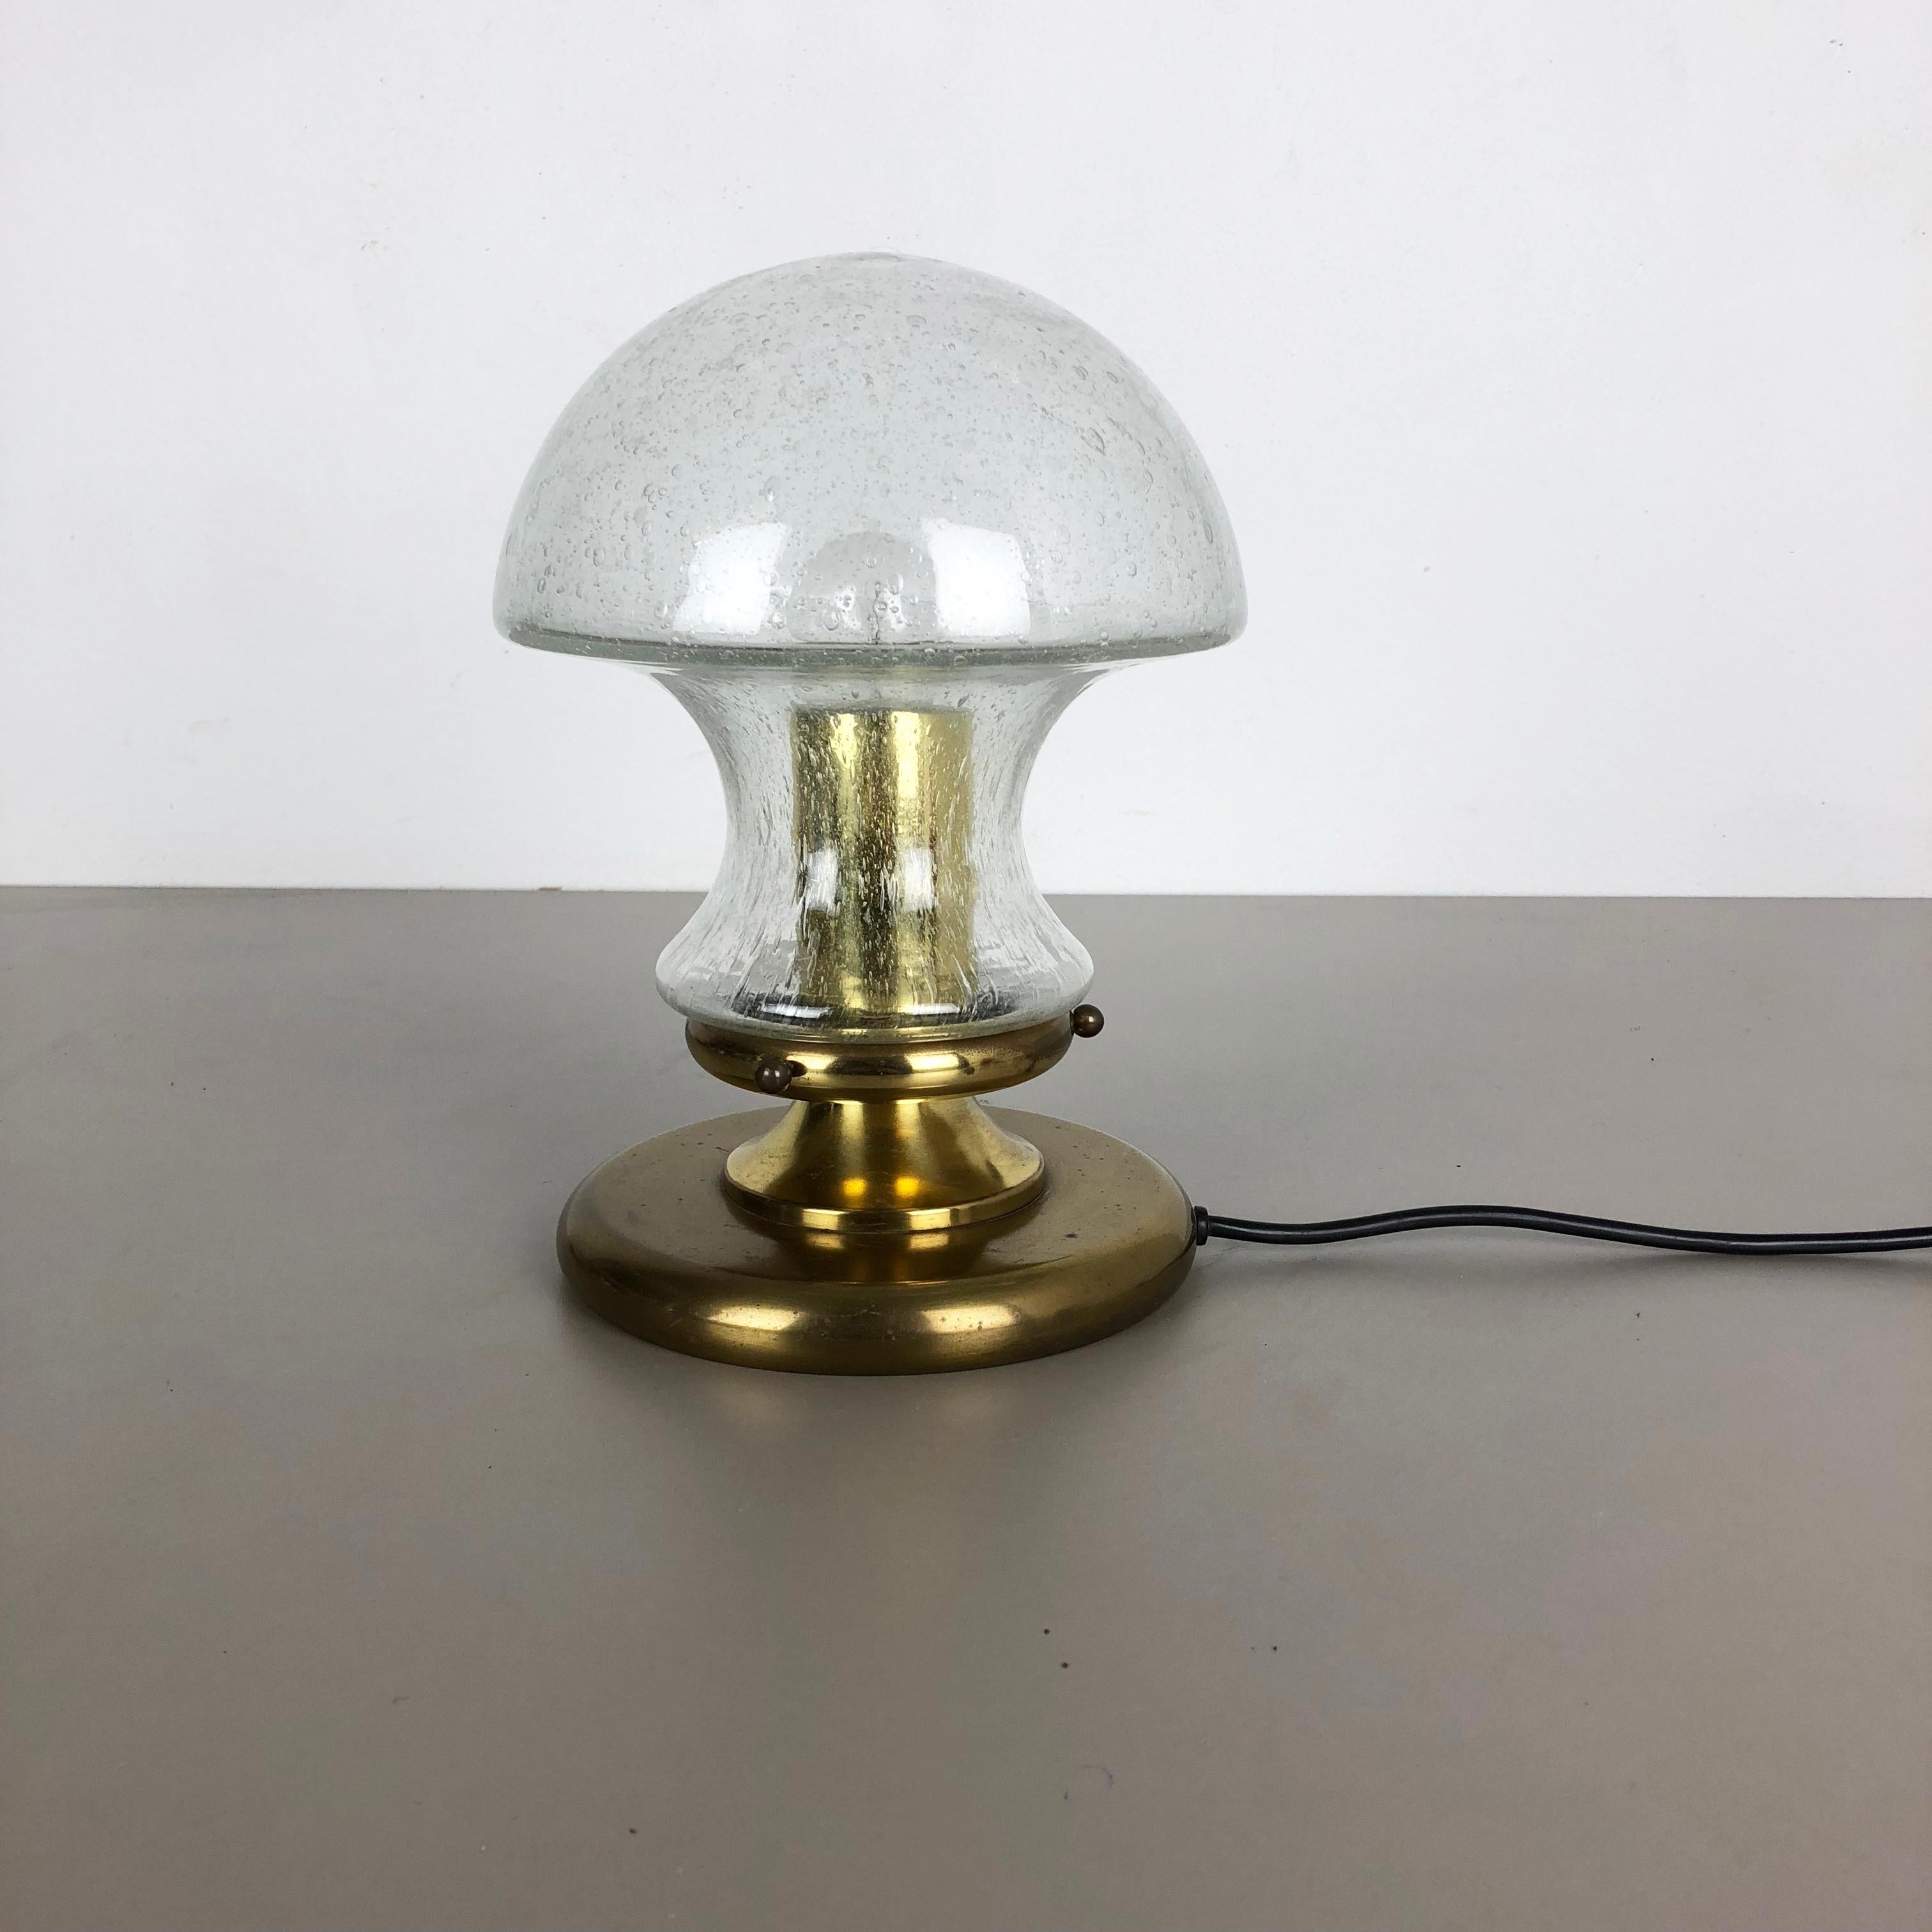 Mid-Century Modern Modernist Glass and Brass Mushroom Table Light by Doria Lights, 1970s, Germany For Sale